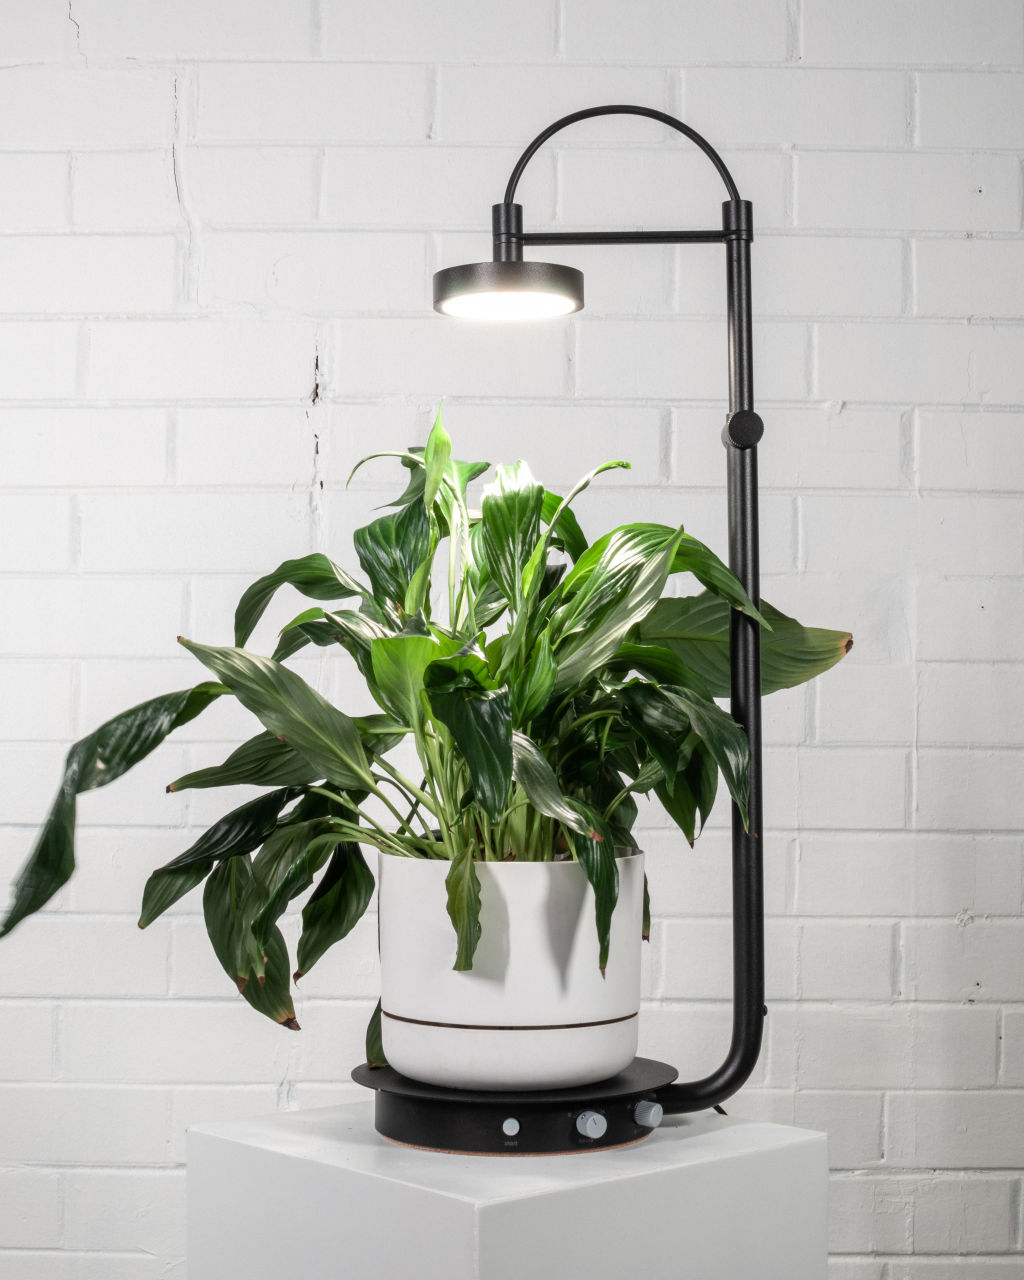 Lights like the ones from Grow Ample can help your plants thrive.  Photo: Grow Ample